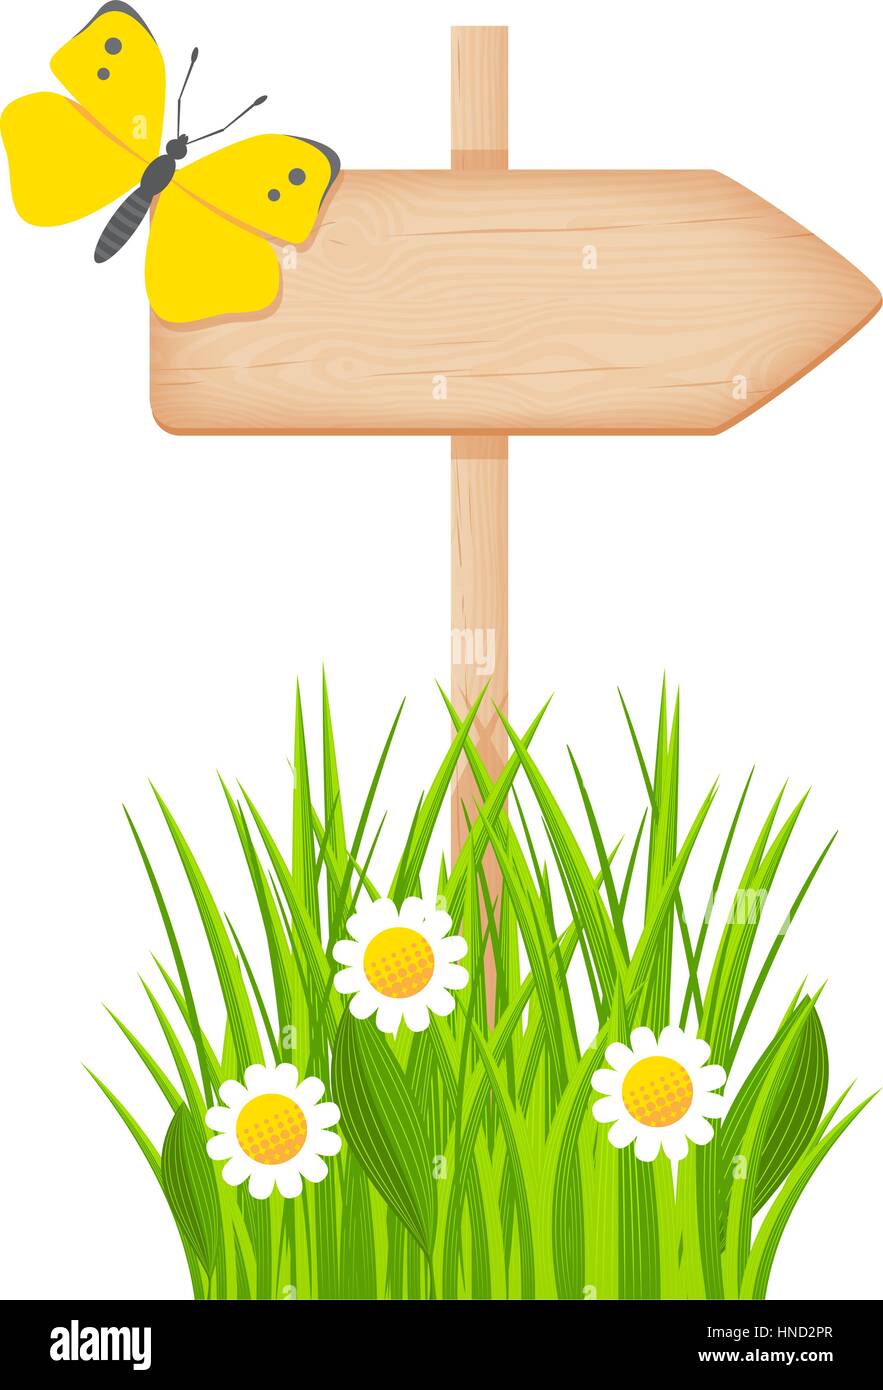 Wooden arrow signboard with knots and cracks on a pole at the grass lawn with flowers and butterfly vector illustration Stock Vector